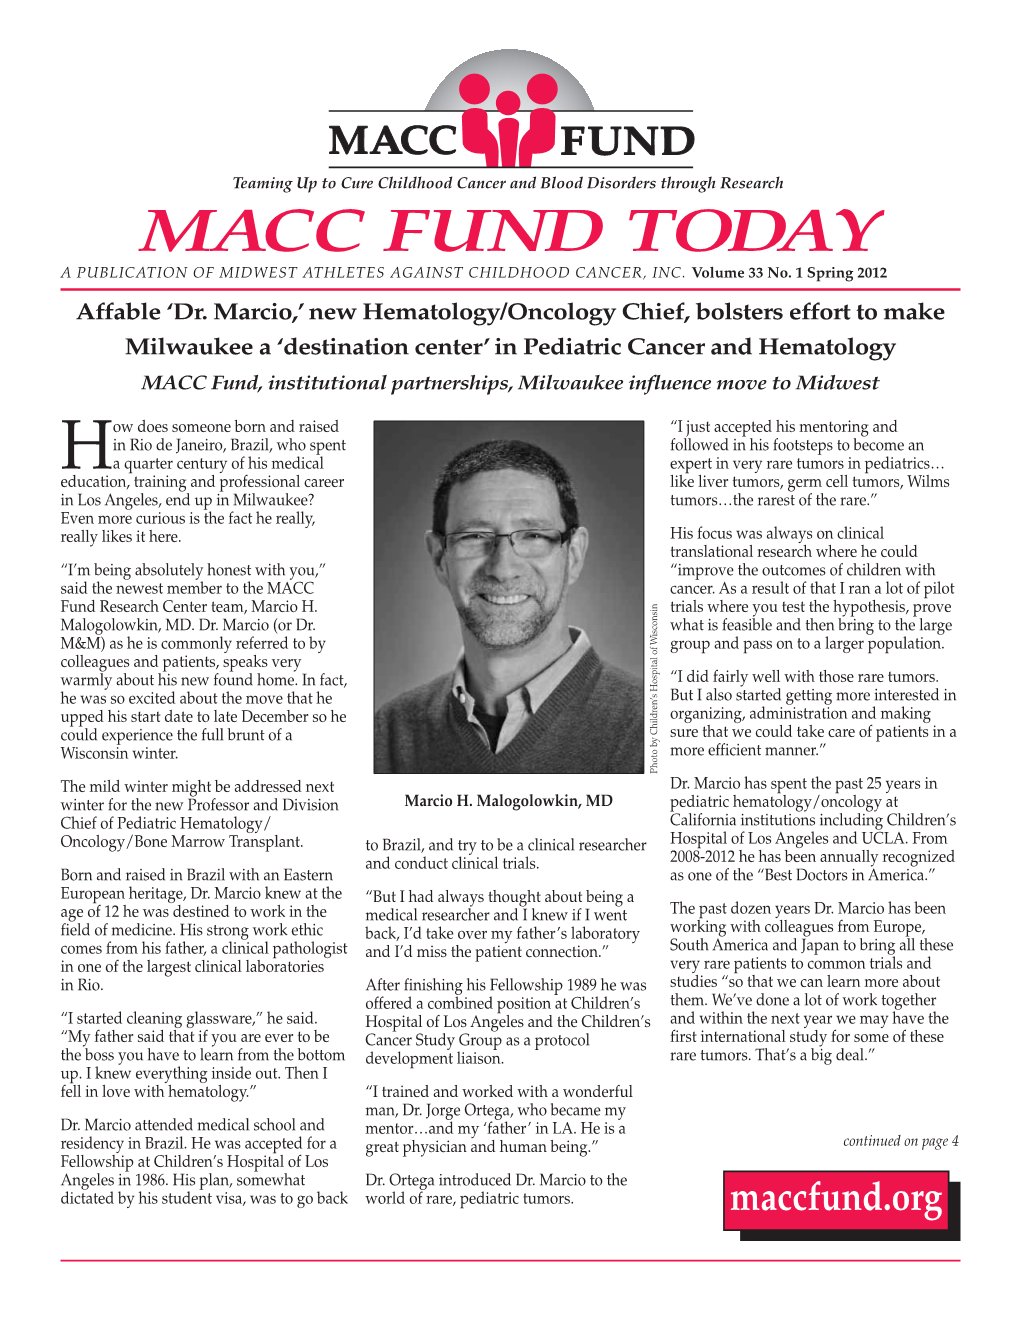 MACC FUND TODAY Is the Official Newsletter of the MACC Fund, Midwest Athletes Against Childhood Cancer, Inc